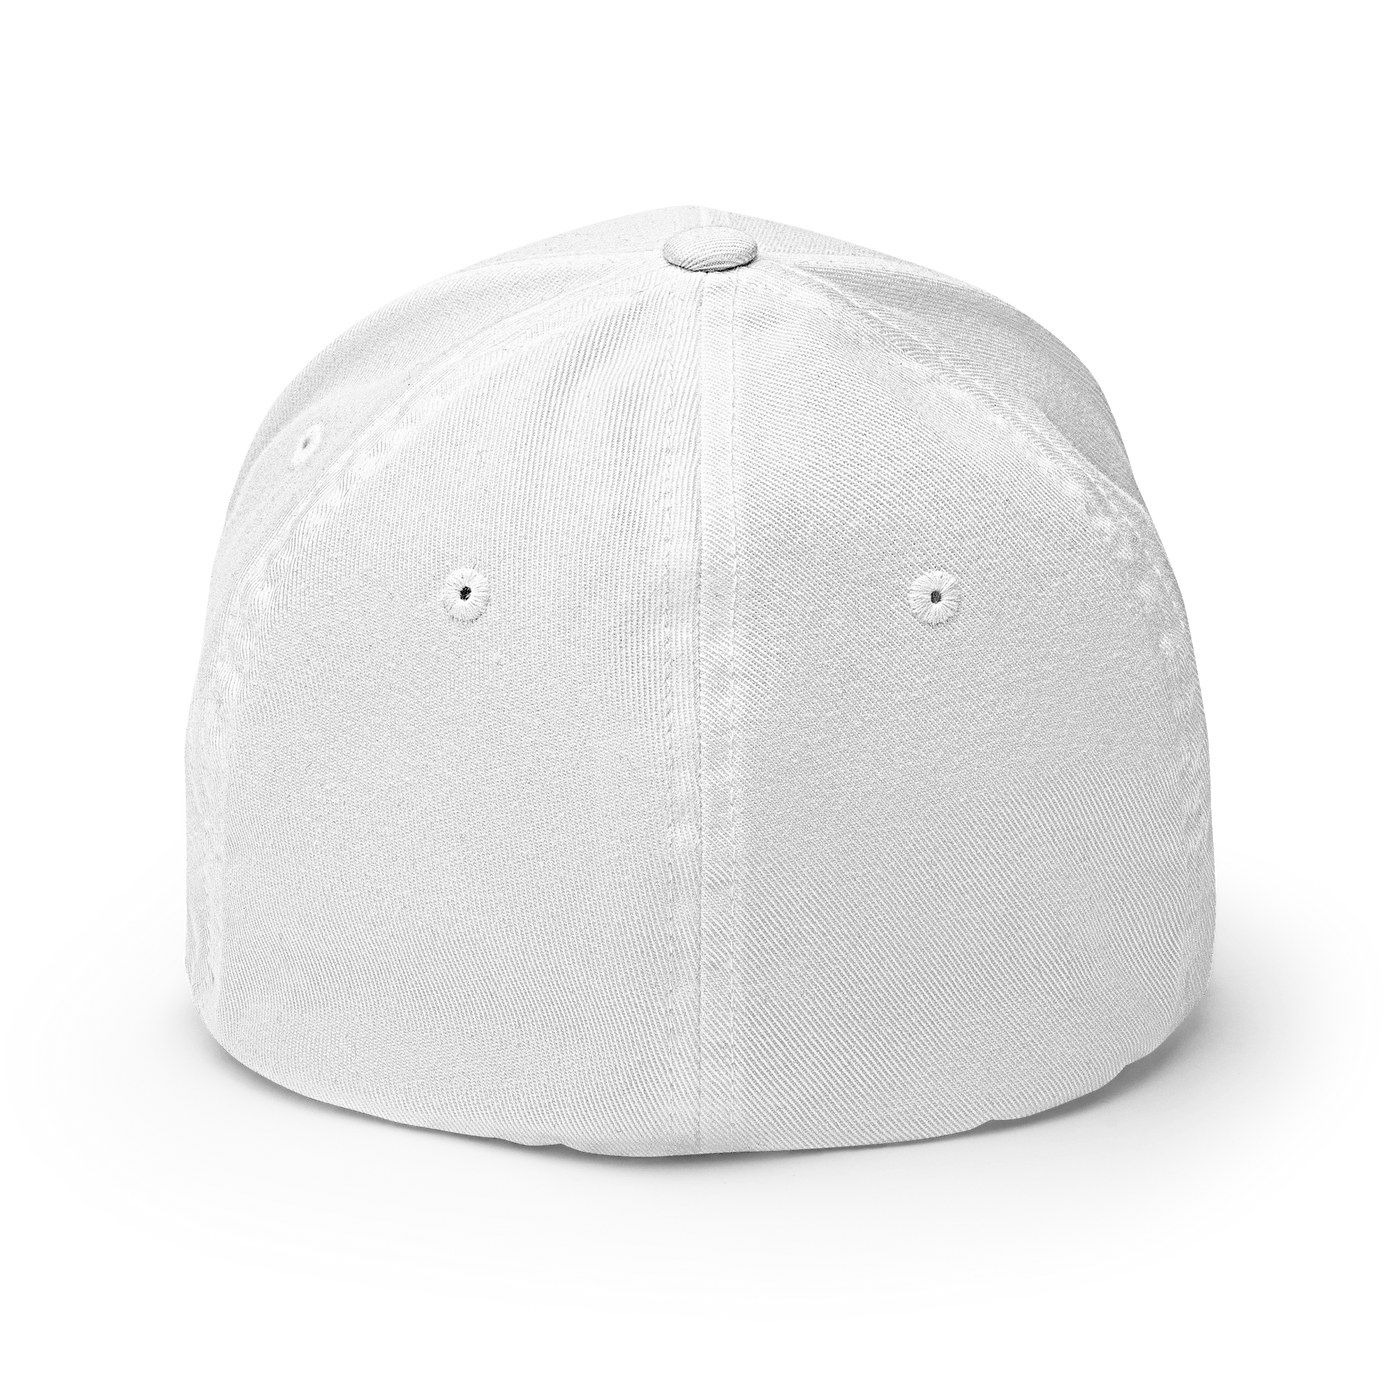 Always Late Flexfit Cap - White - S/M - Just Another Cap Store